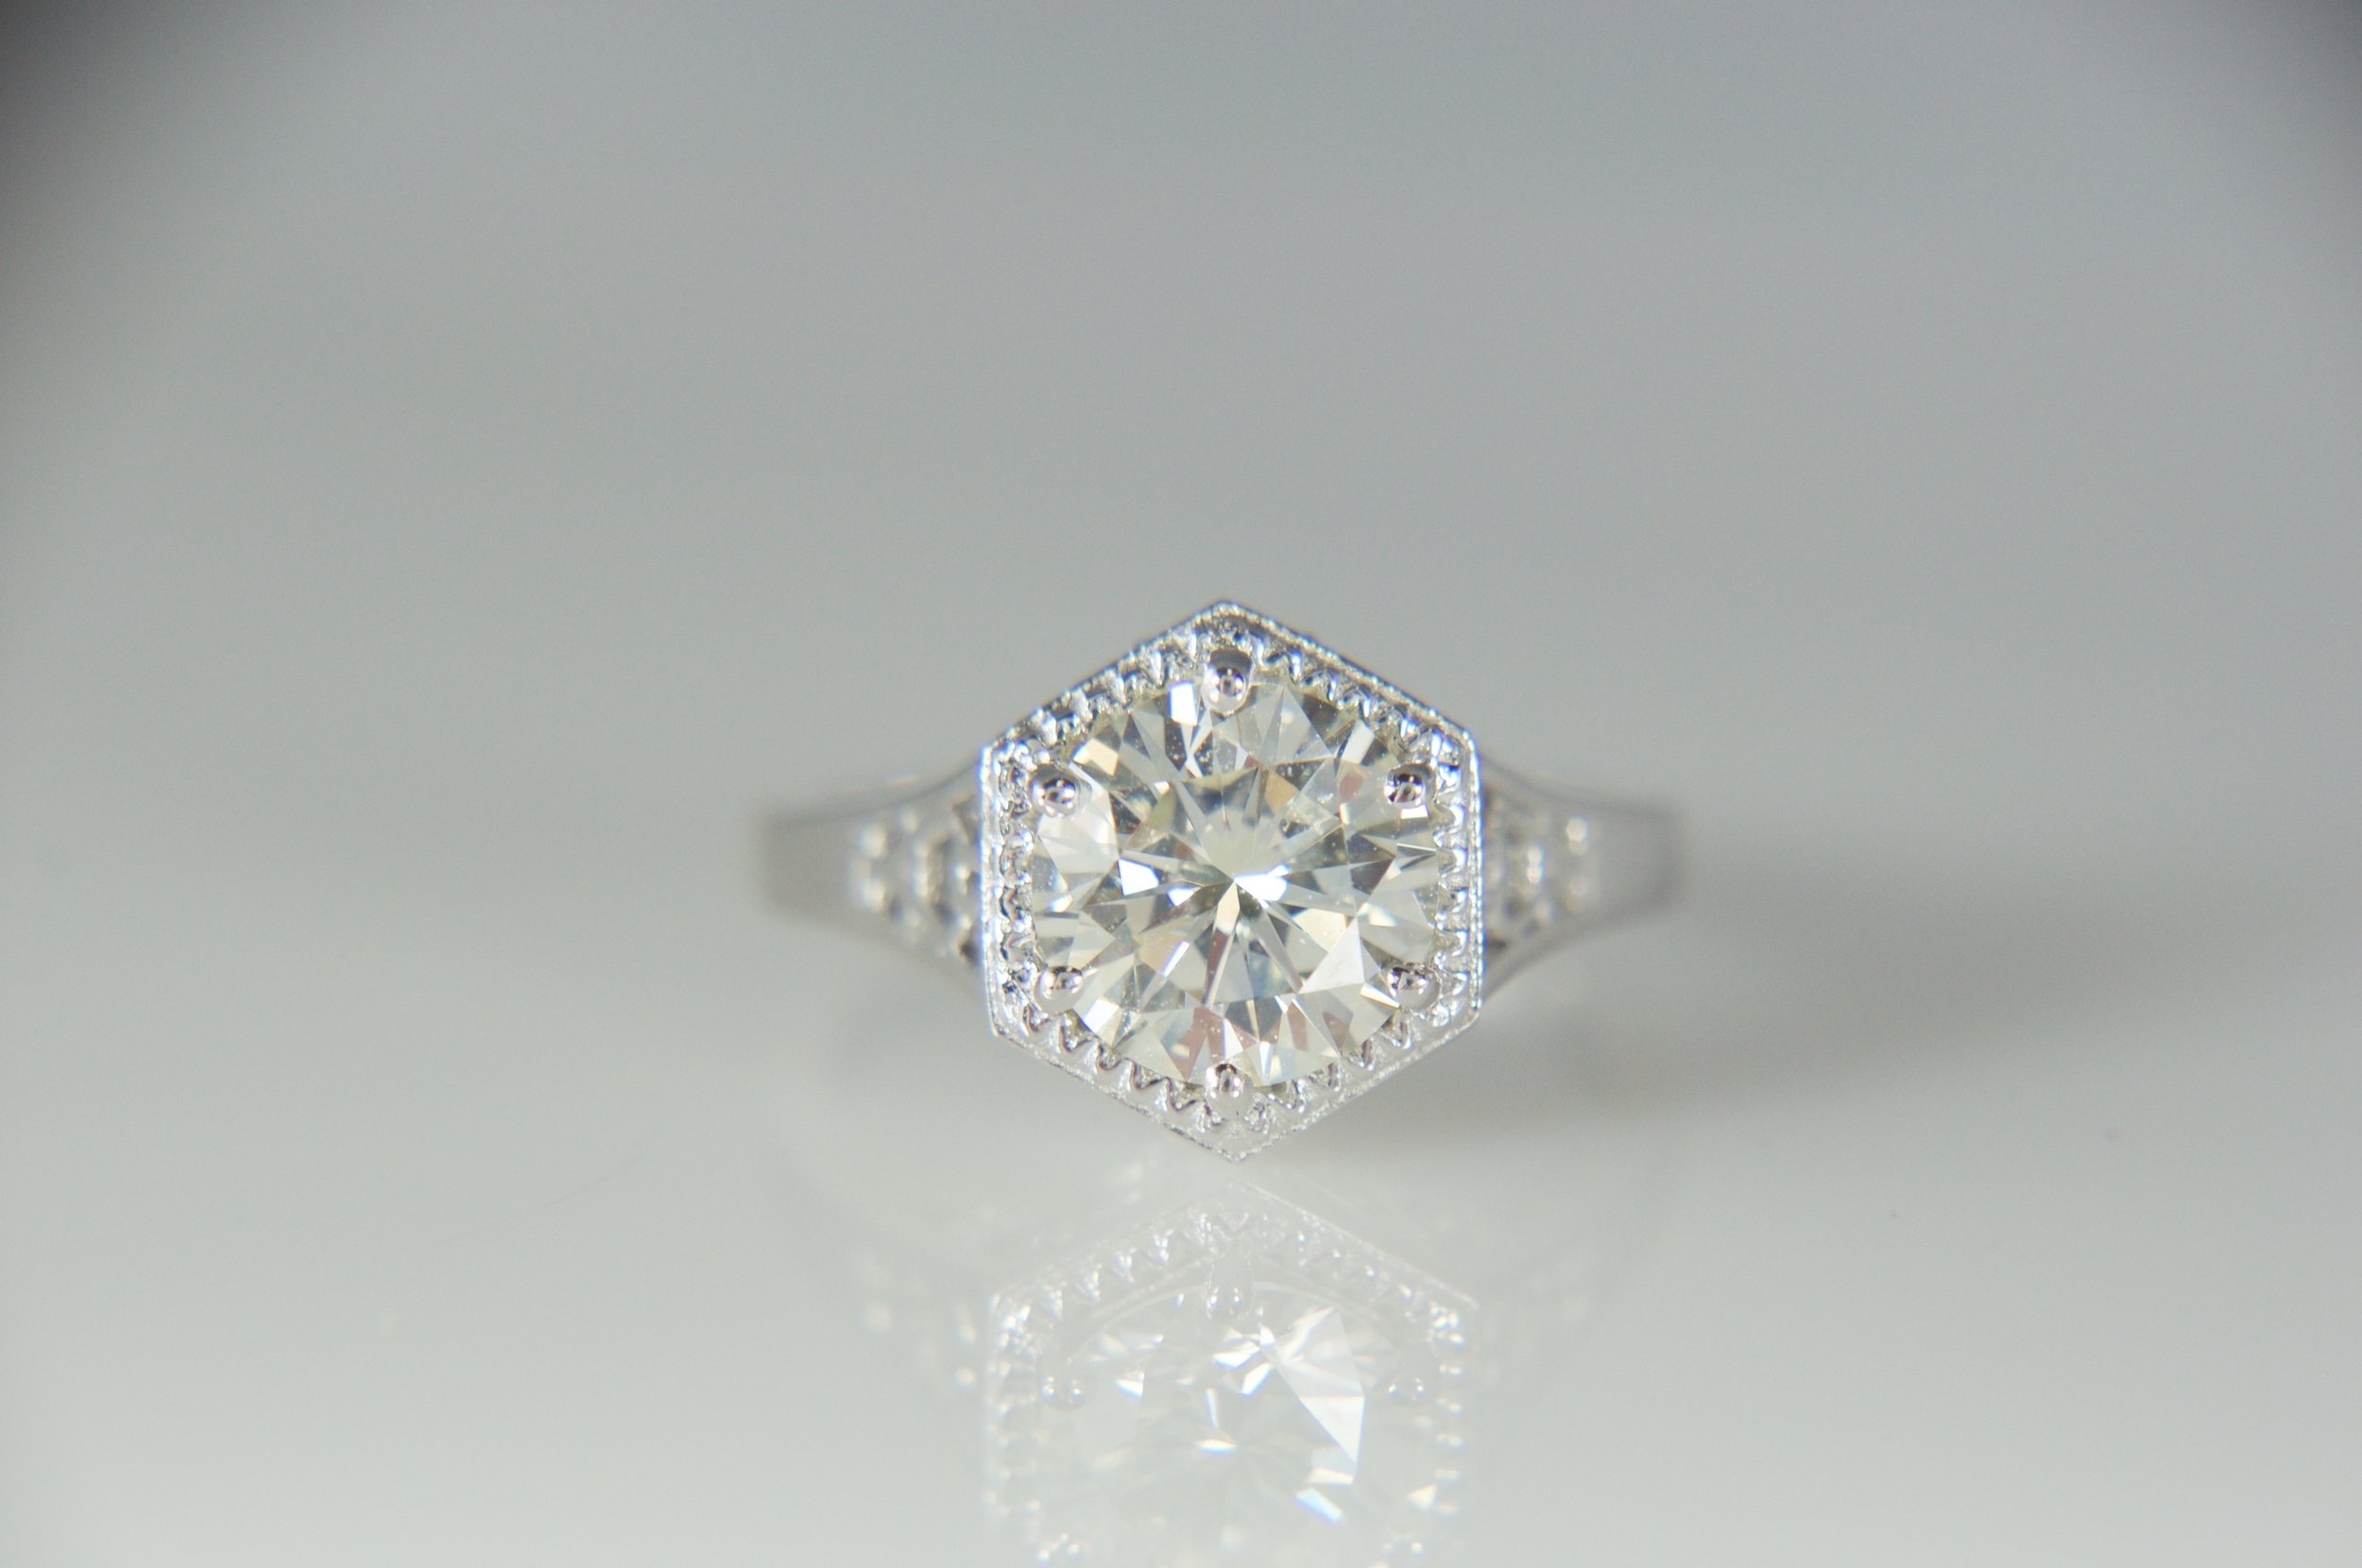 Antique style solitaire engagement ring